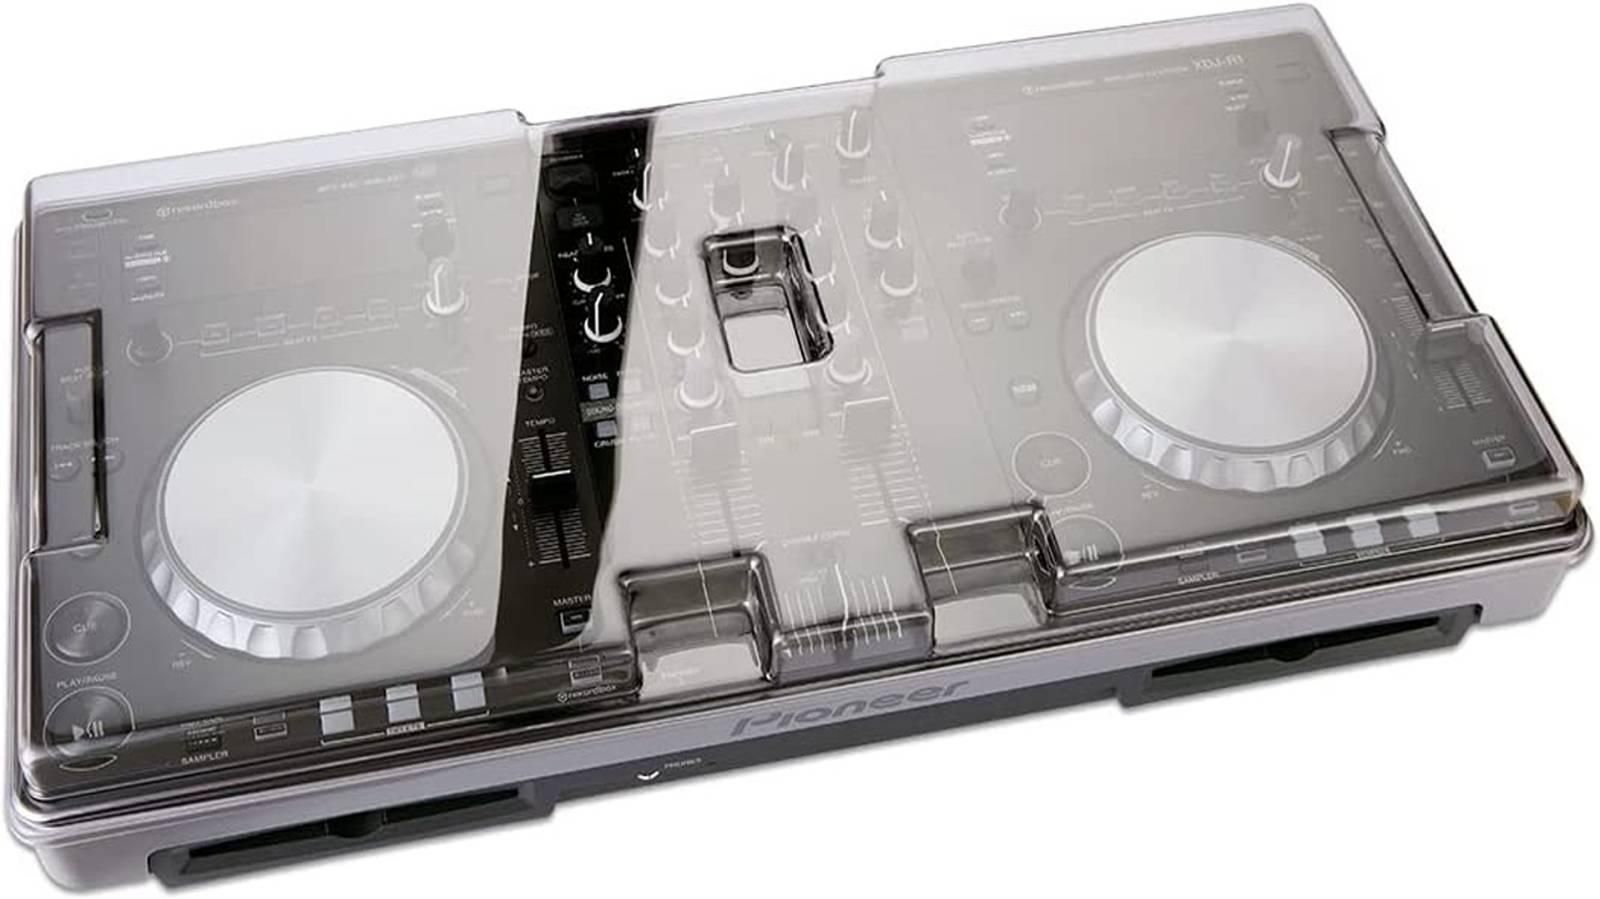 Decksaver Cover For Pioneer XDJ-R1, Strong & Attractive Protection for Your Gear, Polycarbonate Material, Smoked Clear | DS-PC-XDJ-R1